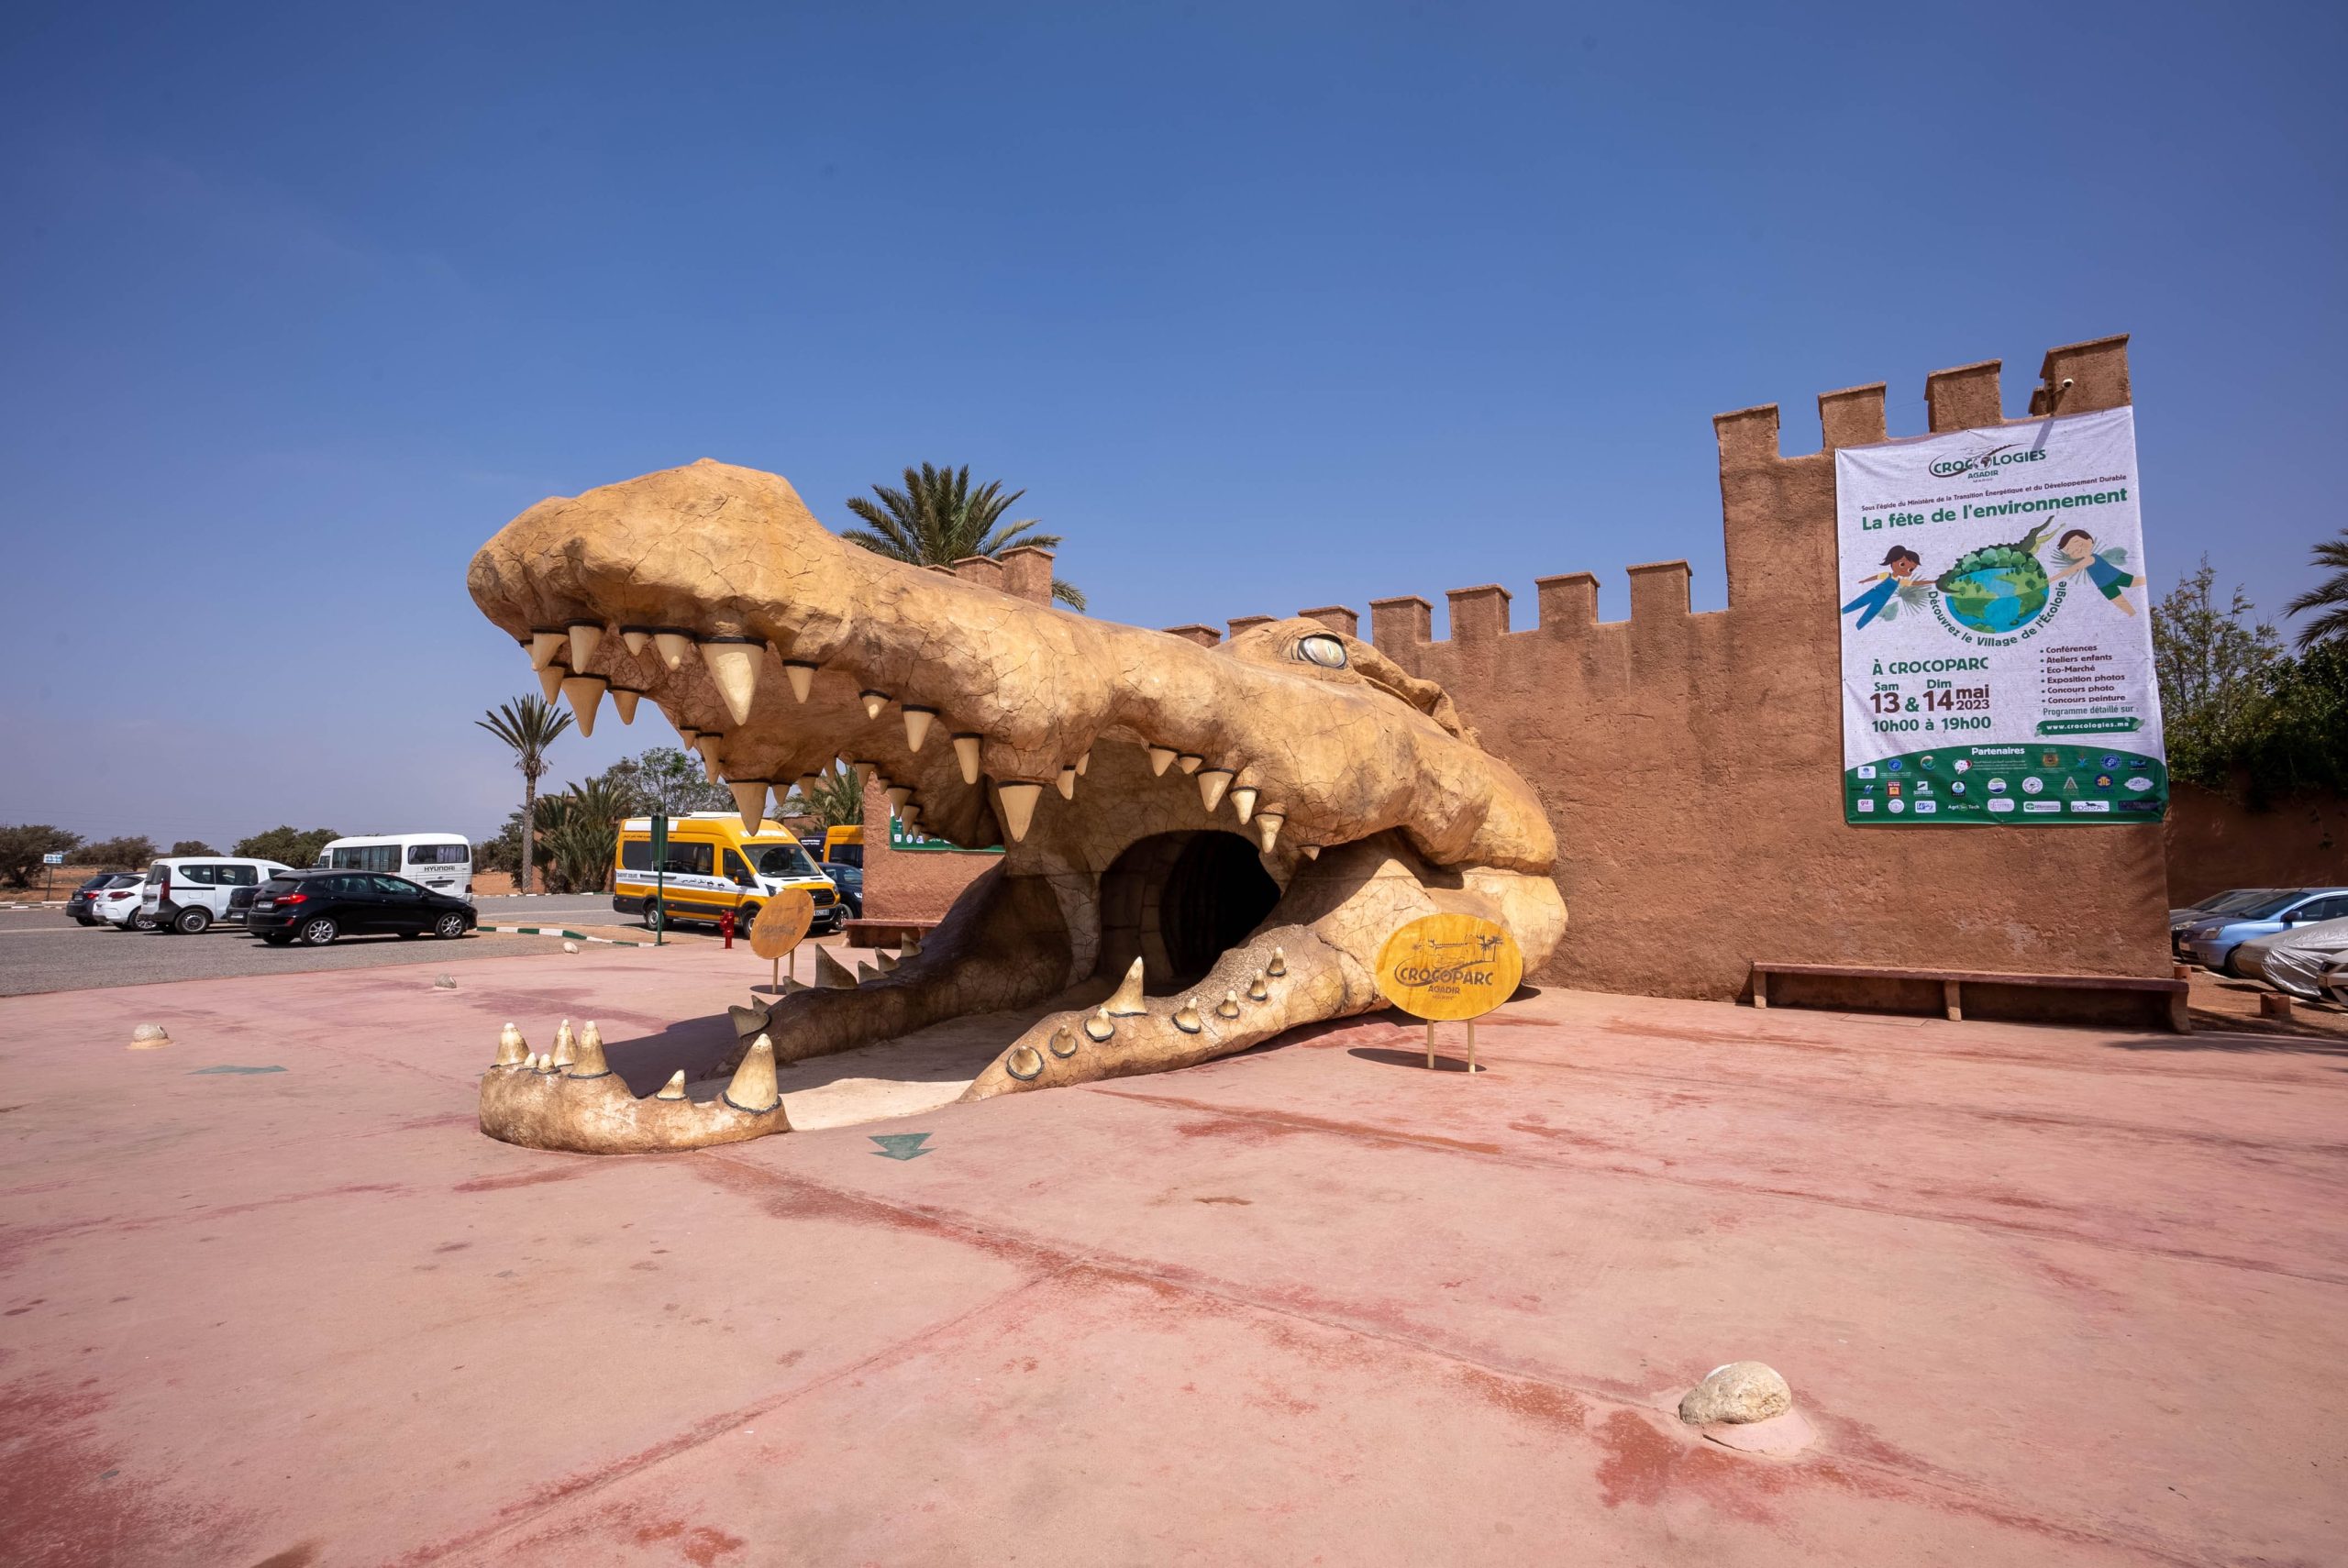 1075 Eco-School pupils and Young Reporters for the Environment attended the Crocologies of Agadir